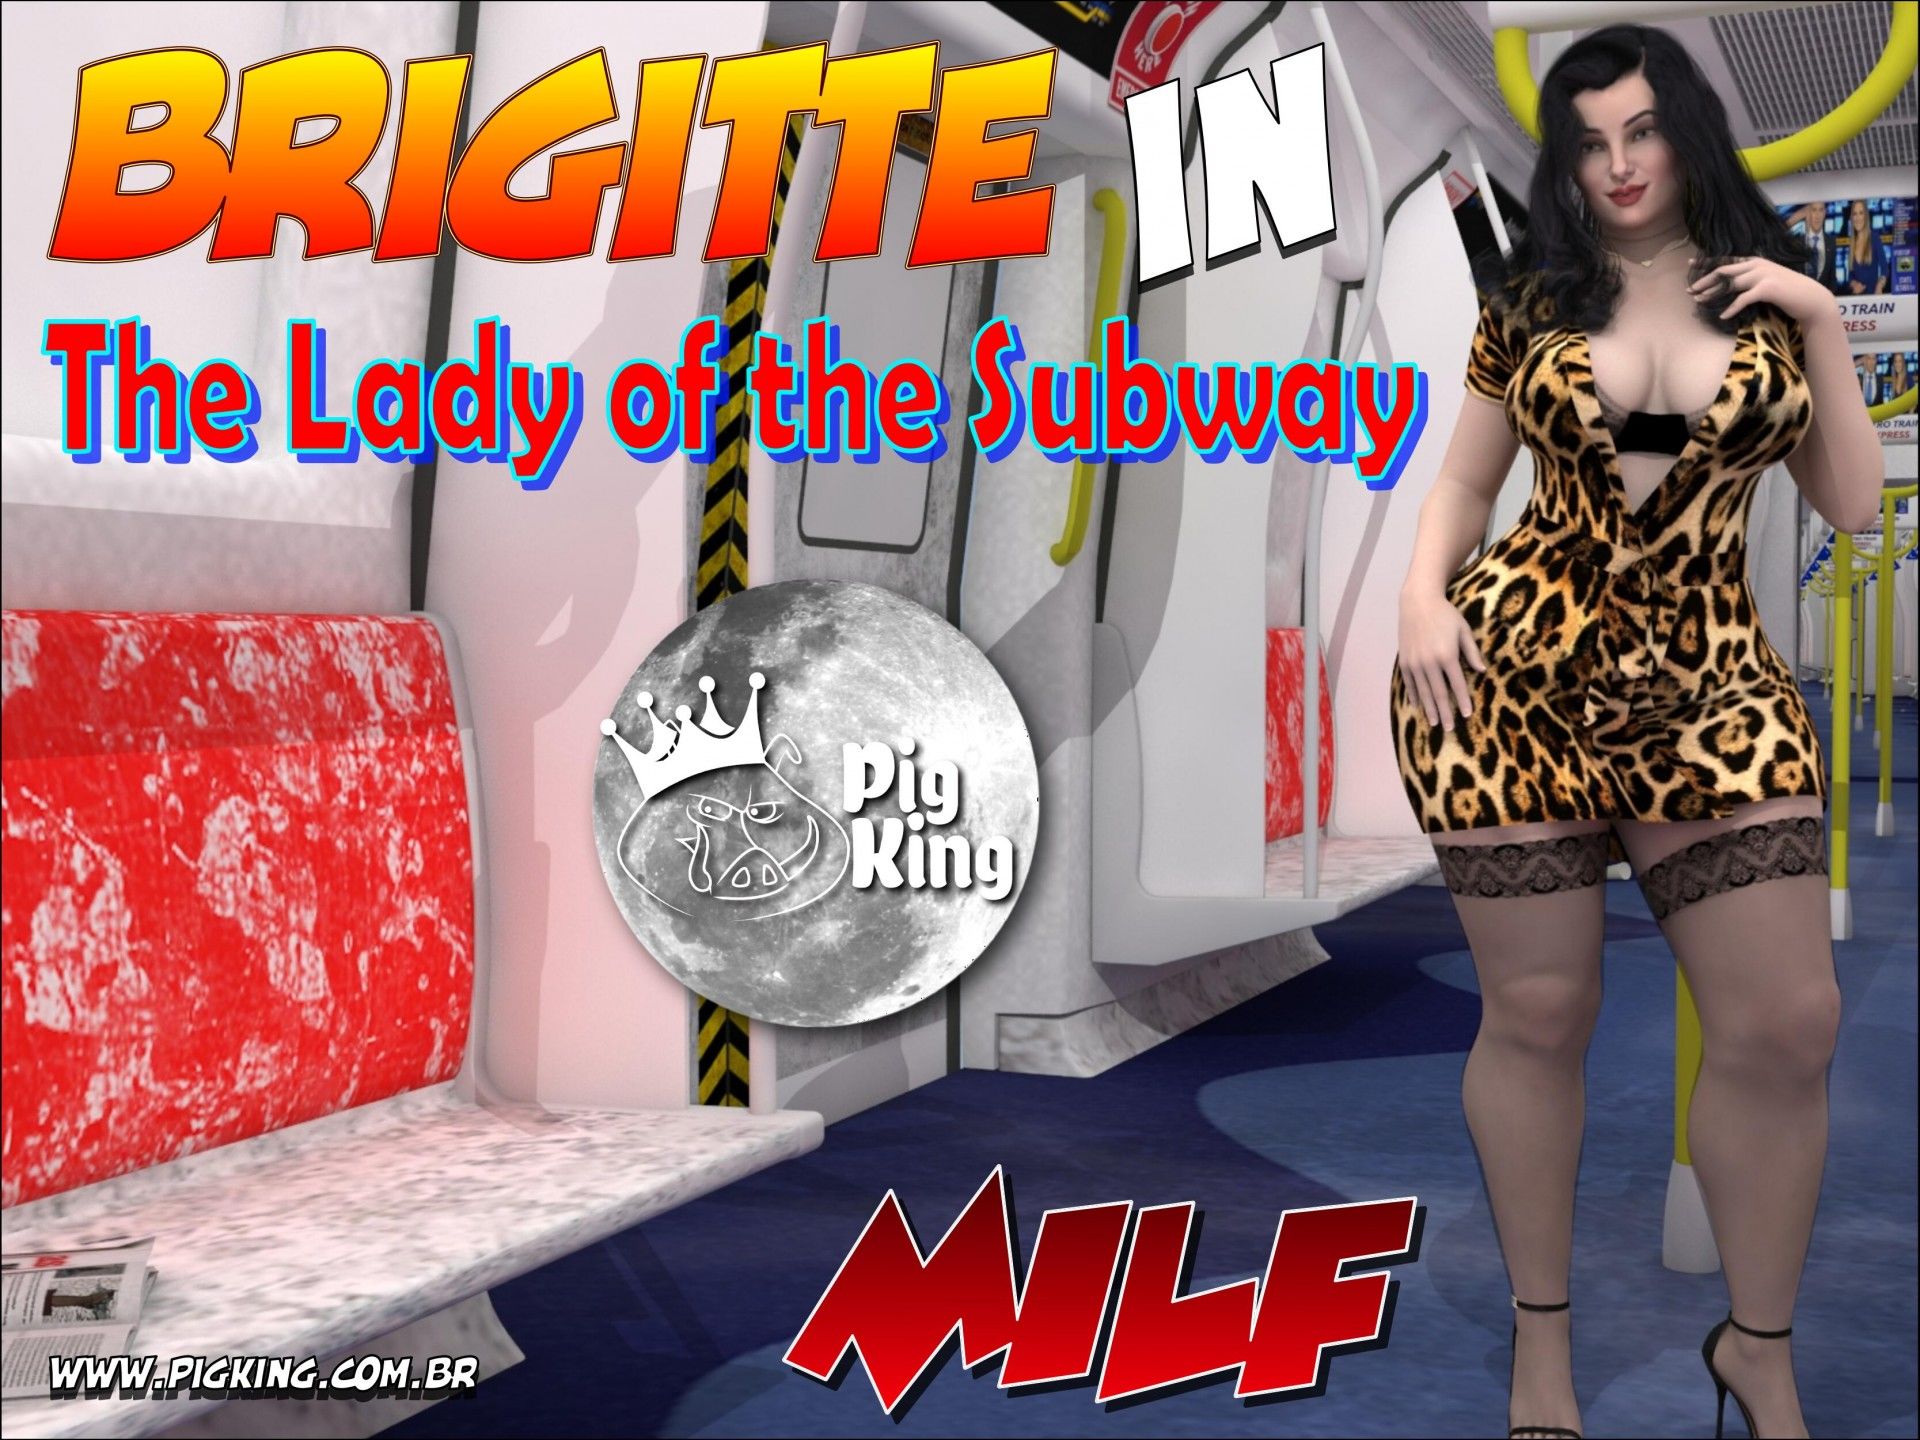 Brigitte in The Lady of the Subway PigKing Milf page 1